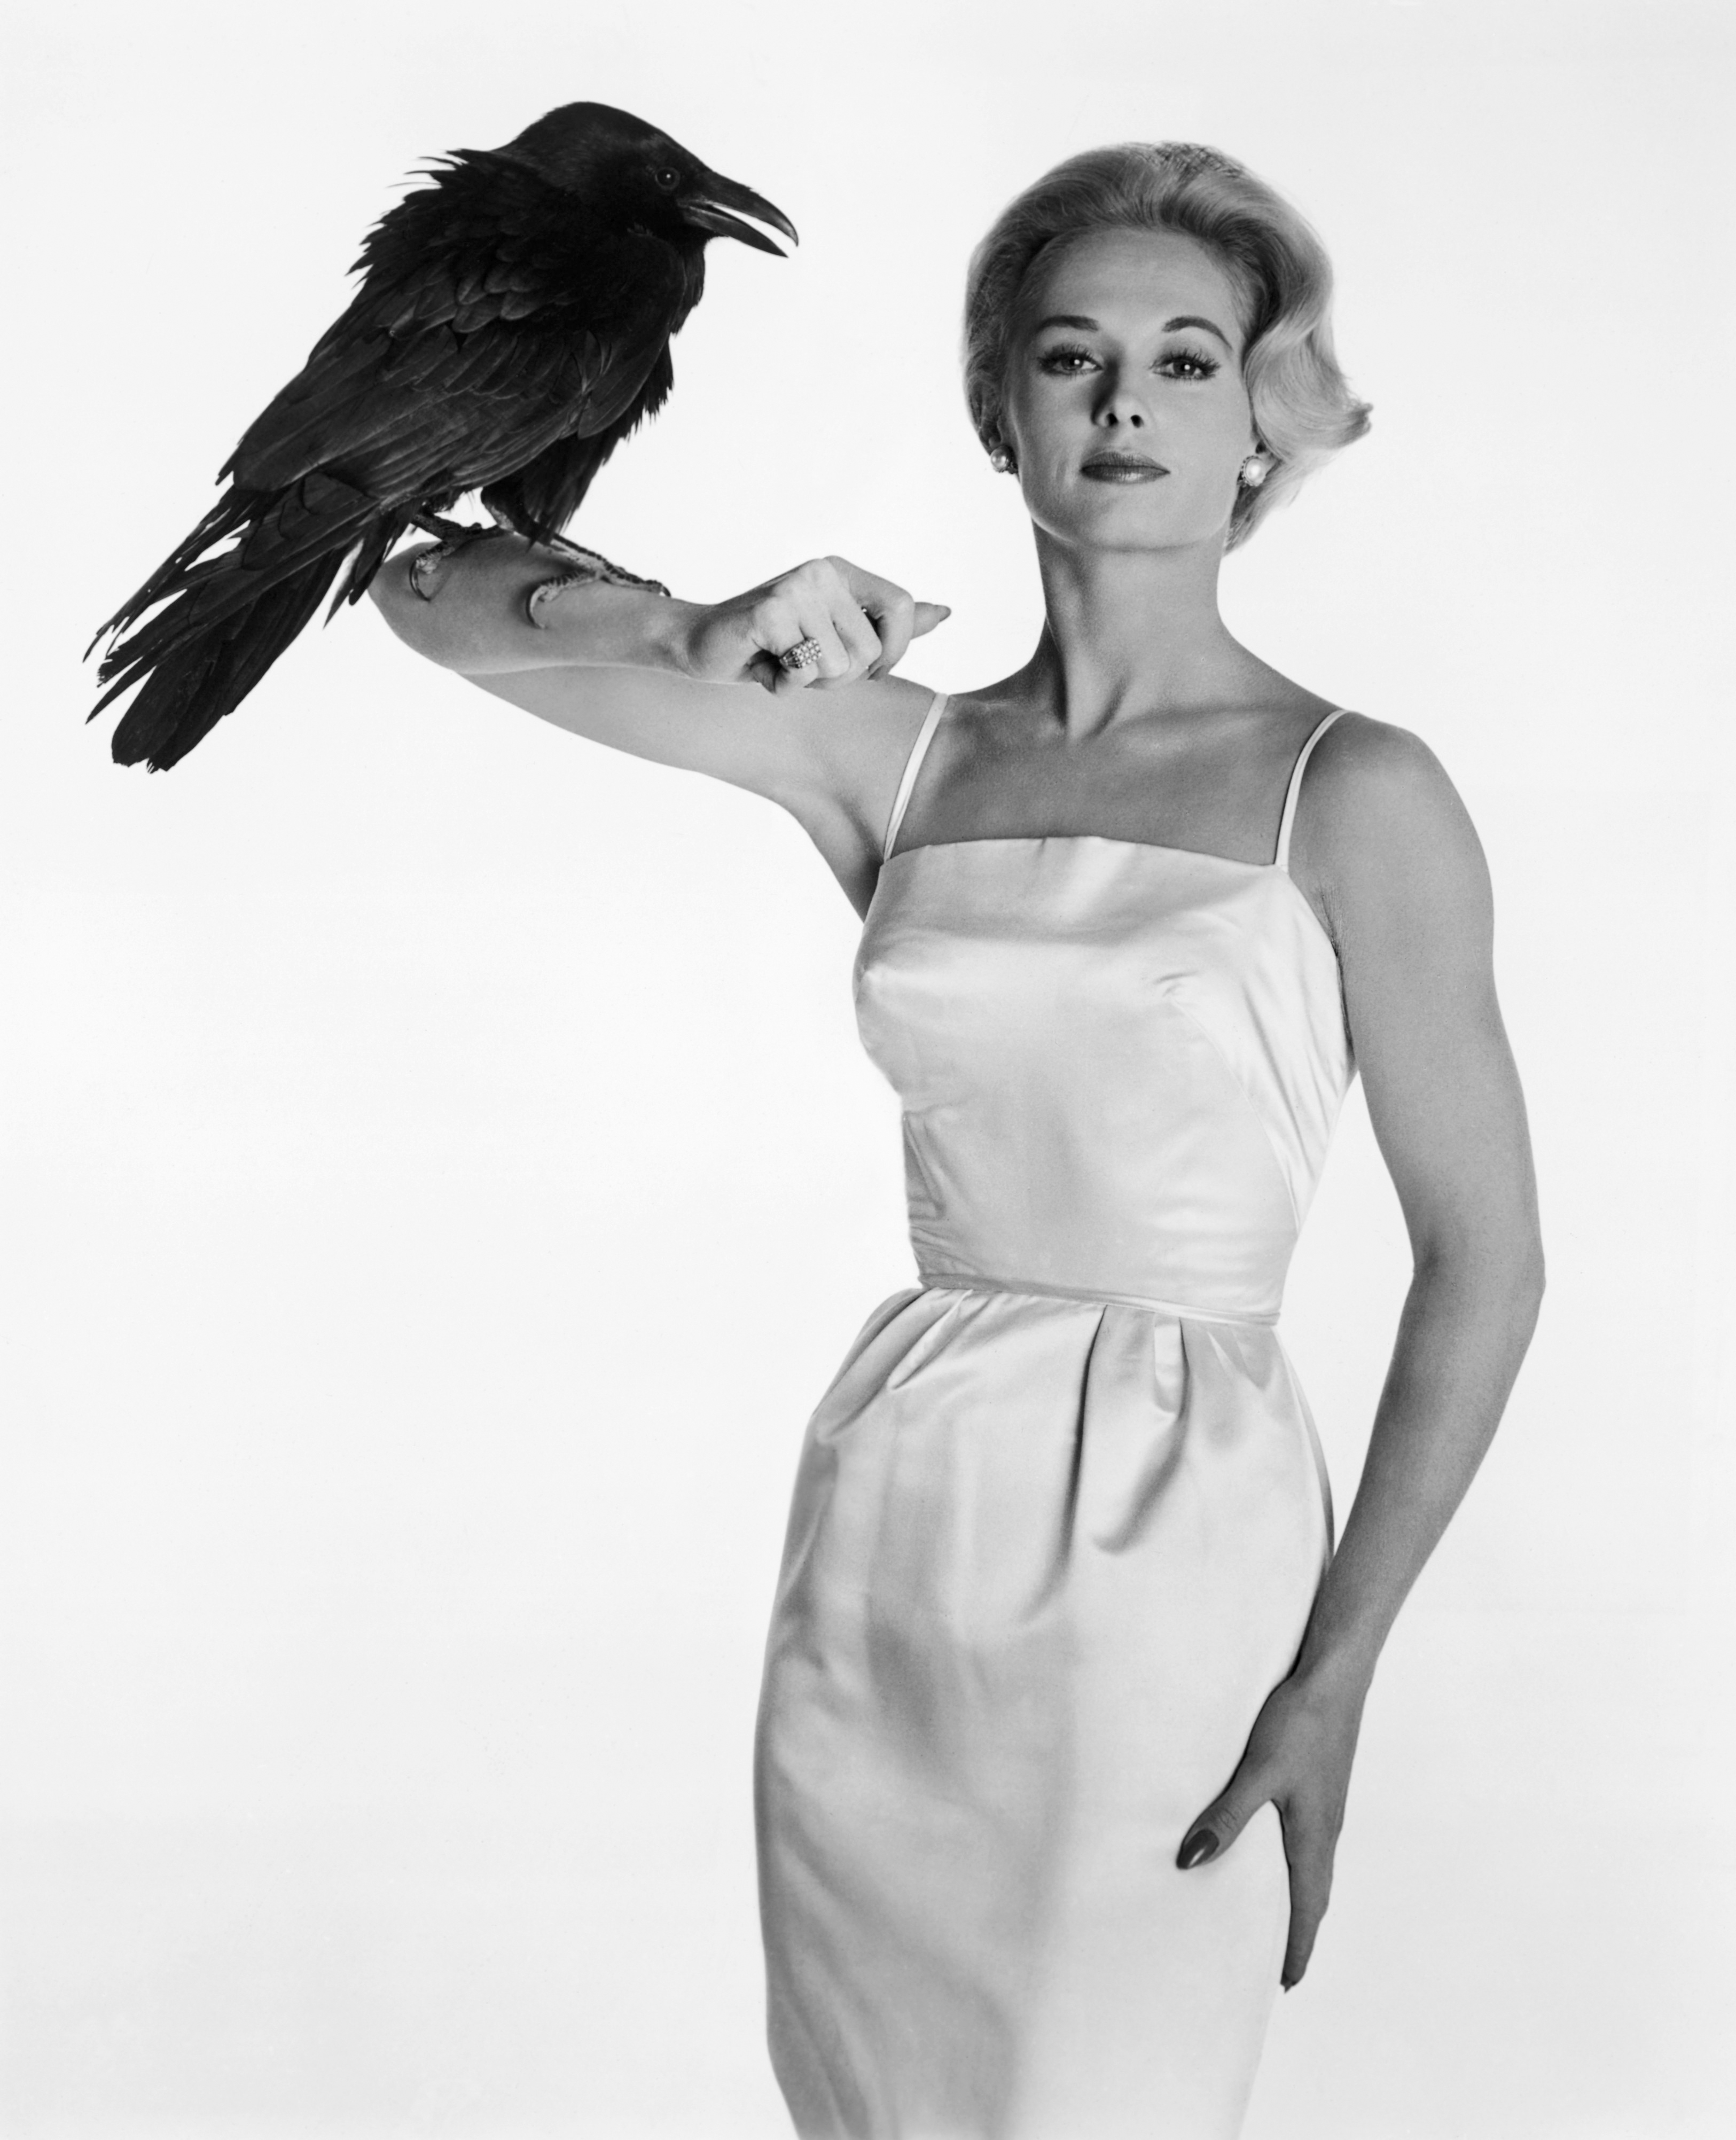 The actress has told several times how difficult it was to record the scene of "birds" (Photo: Bettmann Archive)